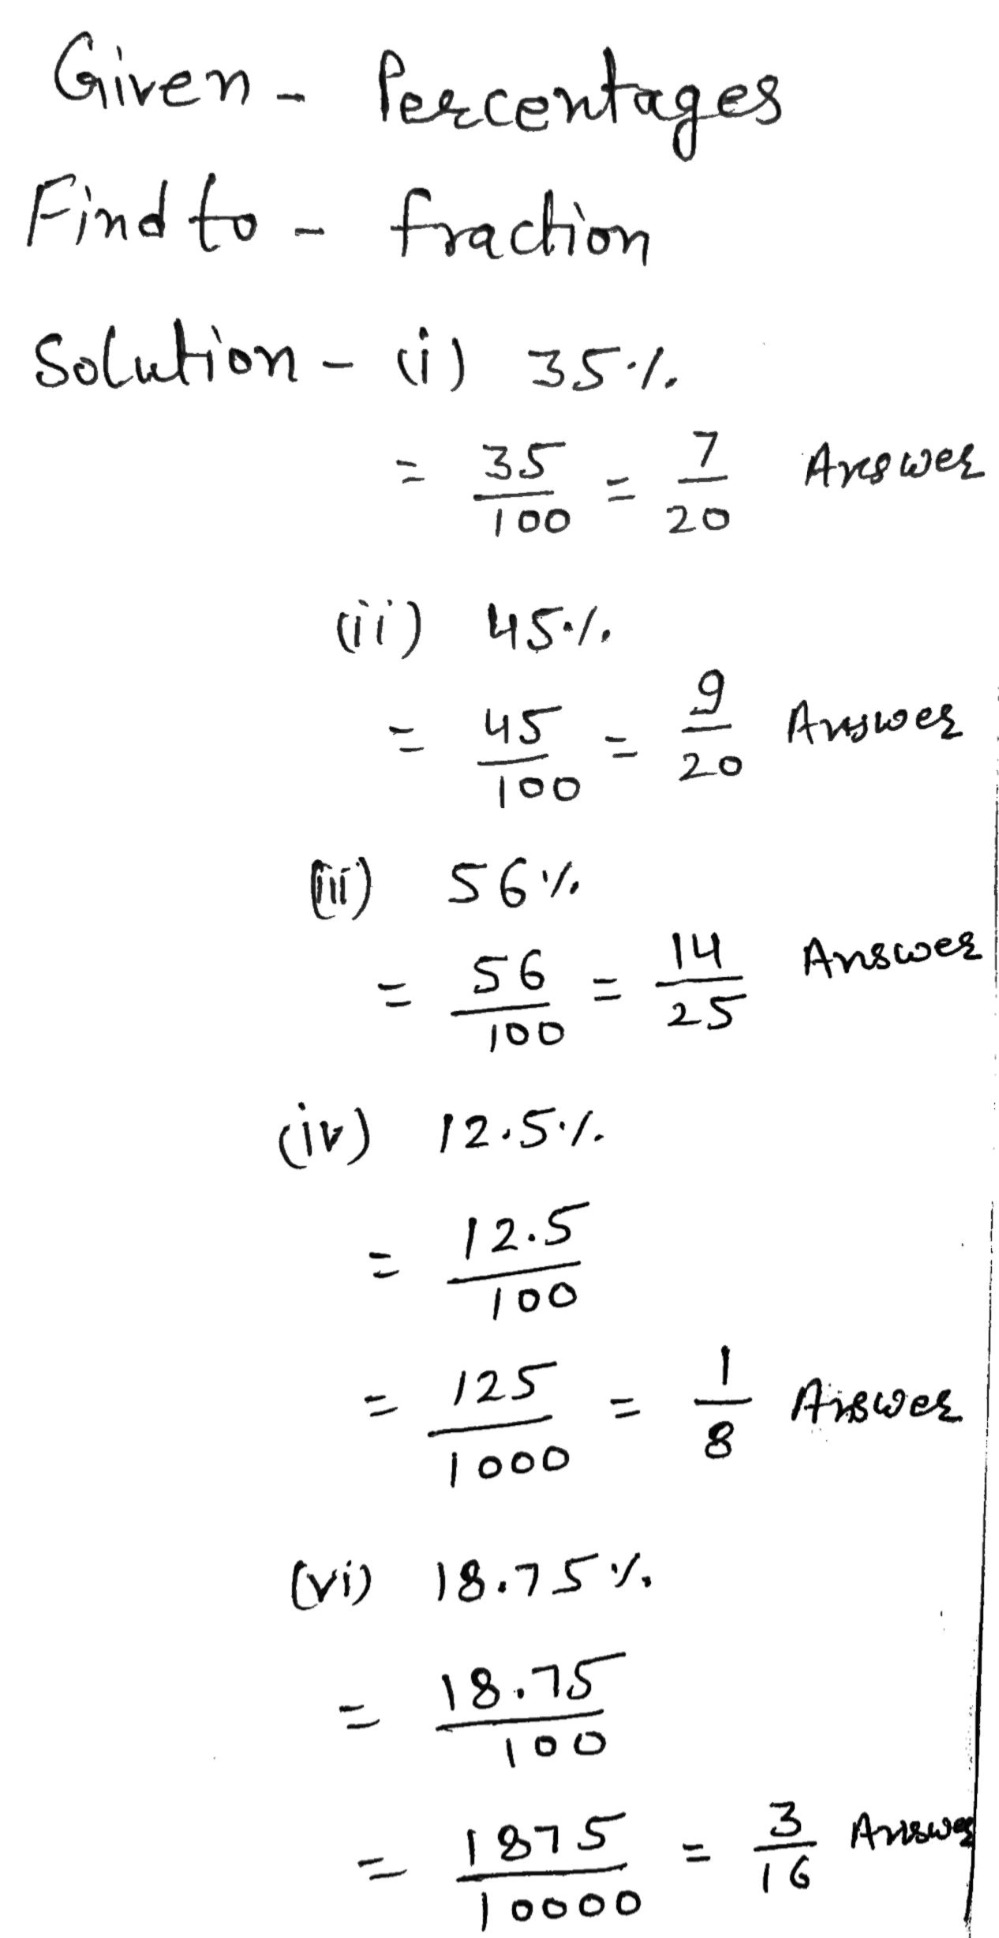 Convert Each Of The Following Percentages Into A Fraction L 35 I0 45 Ii0 56 V 12 5 Vi 18 75 Snapsolve